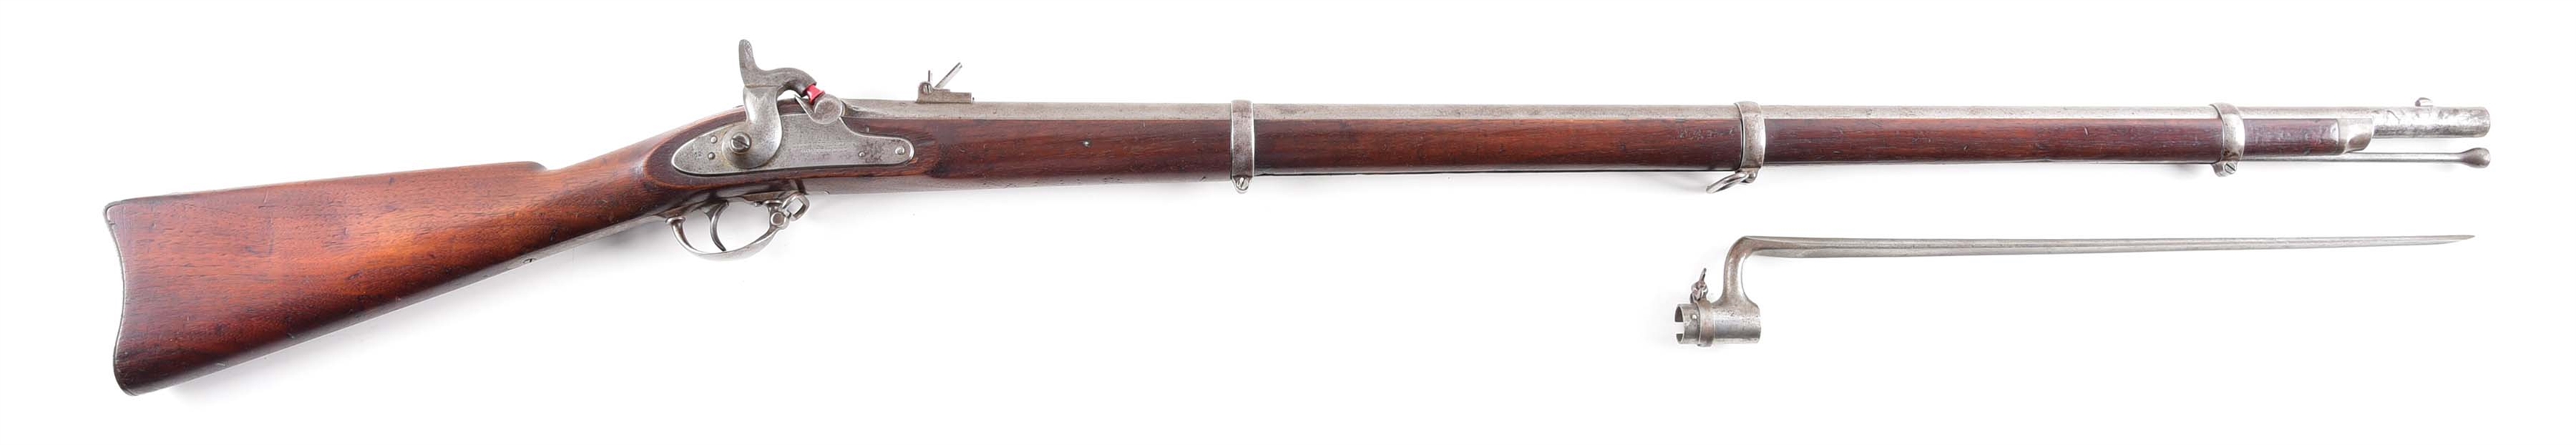 (A) COLT MODEL 1861 RIFLED MUSKET.